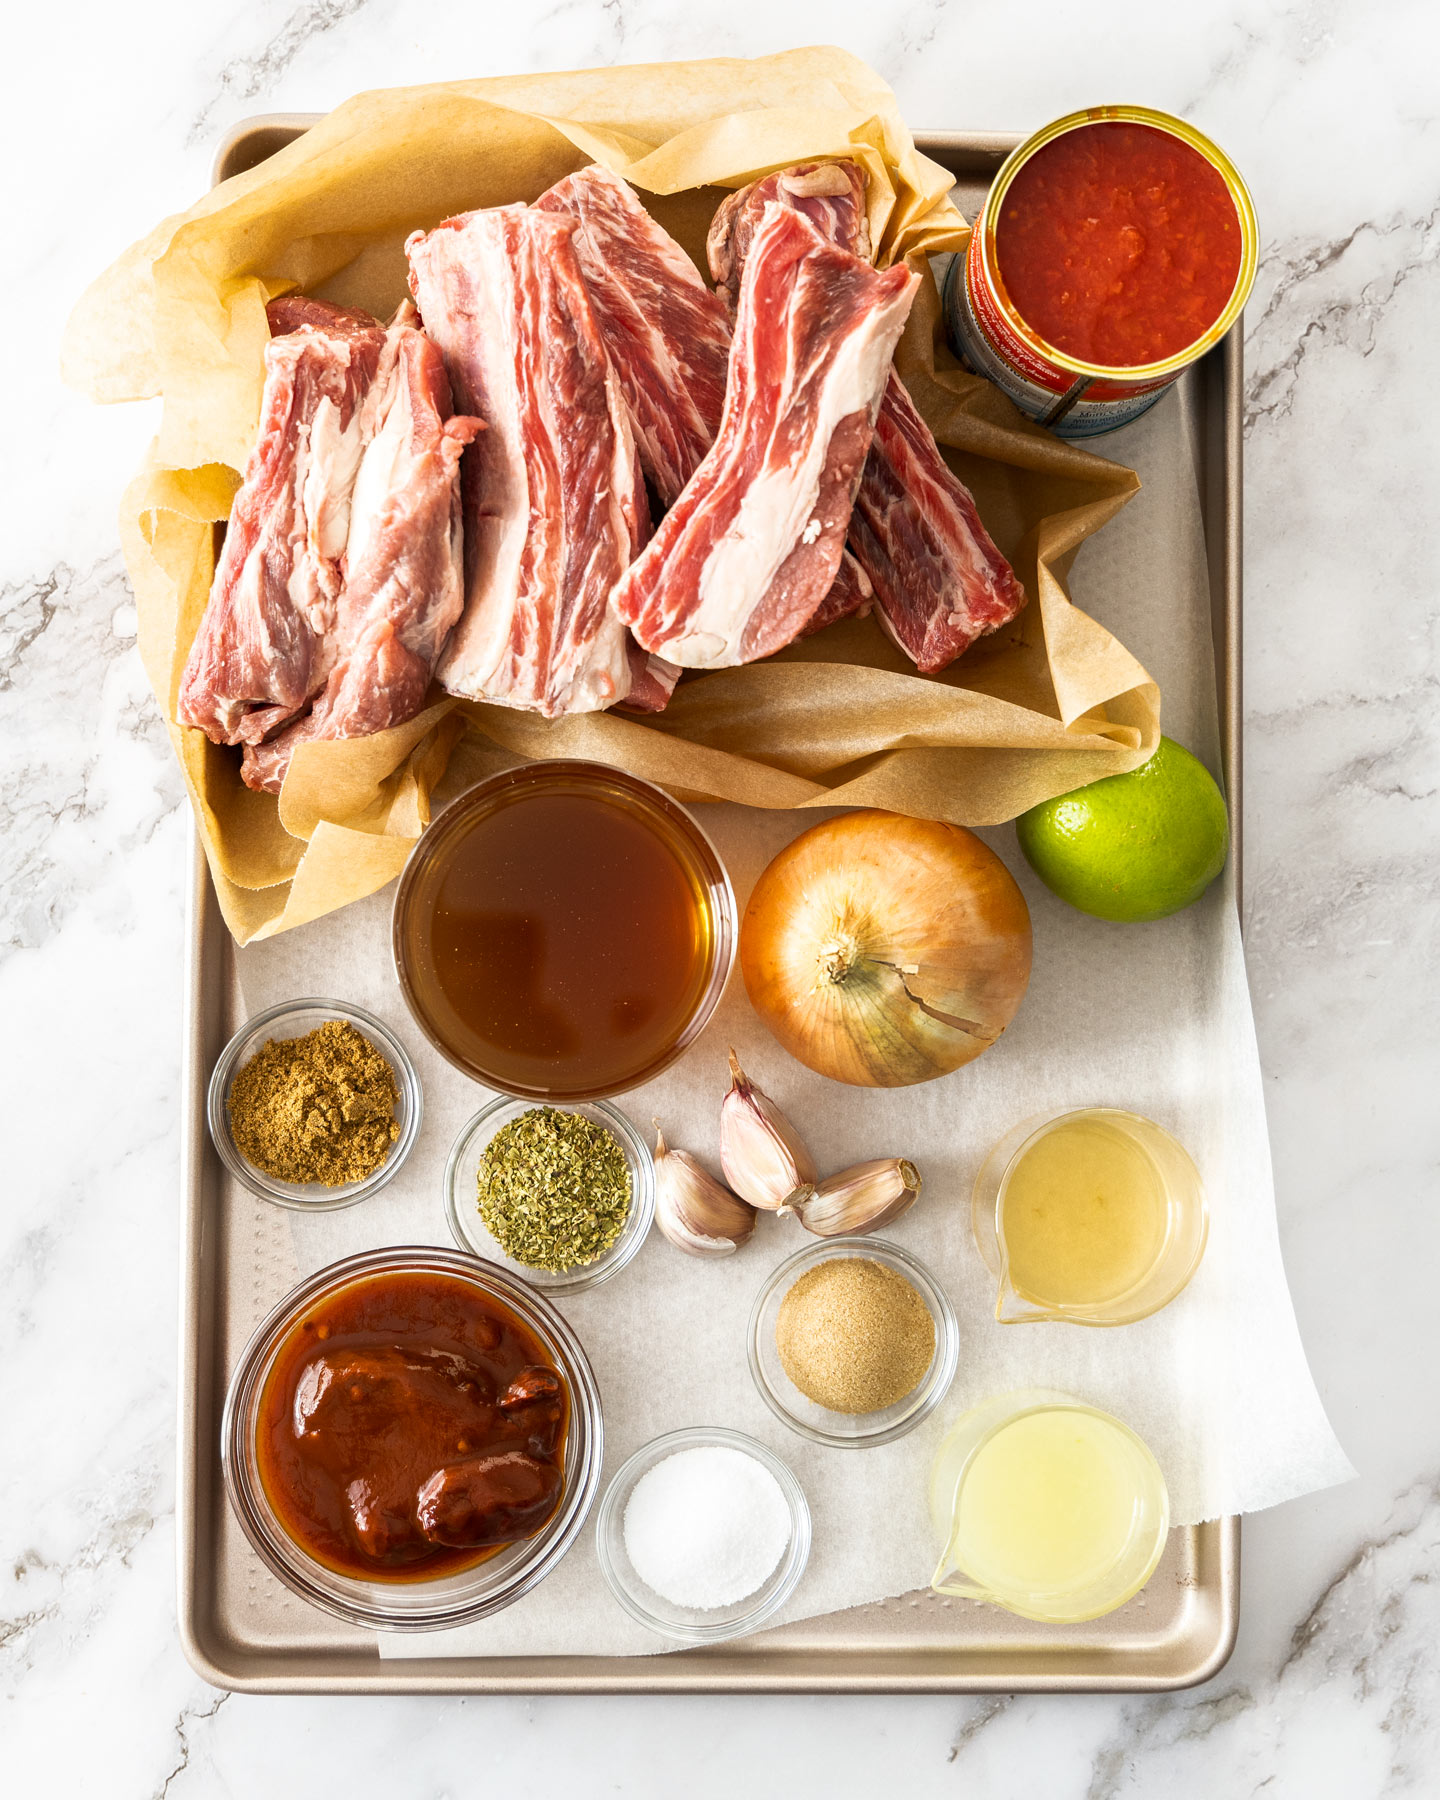 Ingredients for Mexican short ribs on a baking tray.